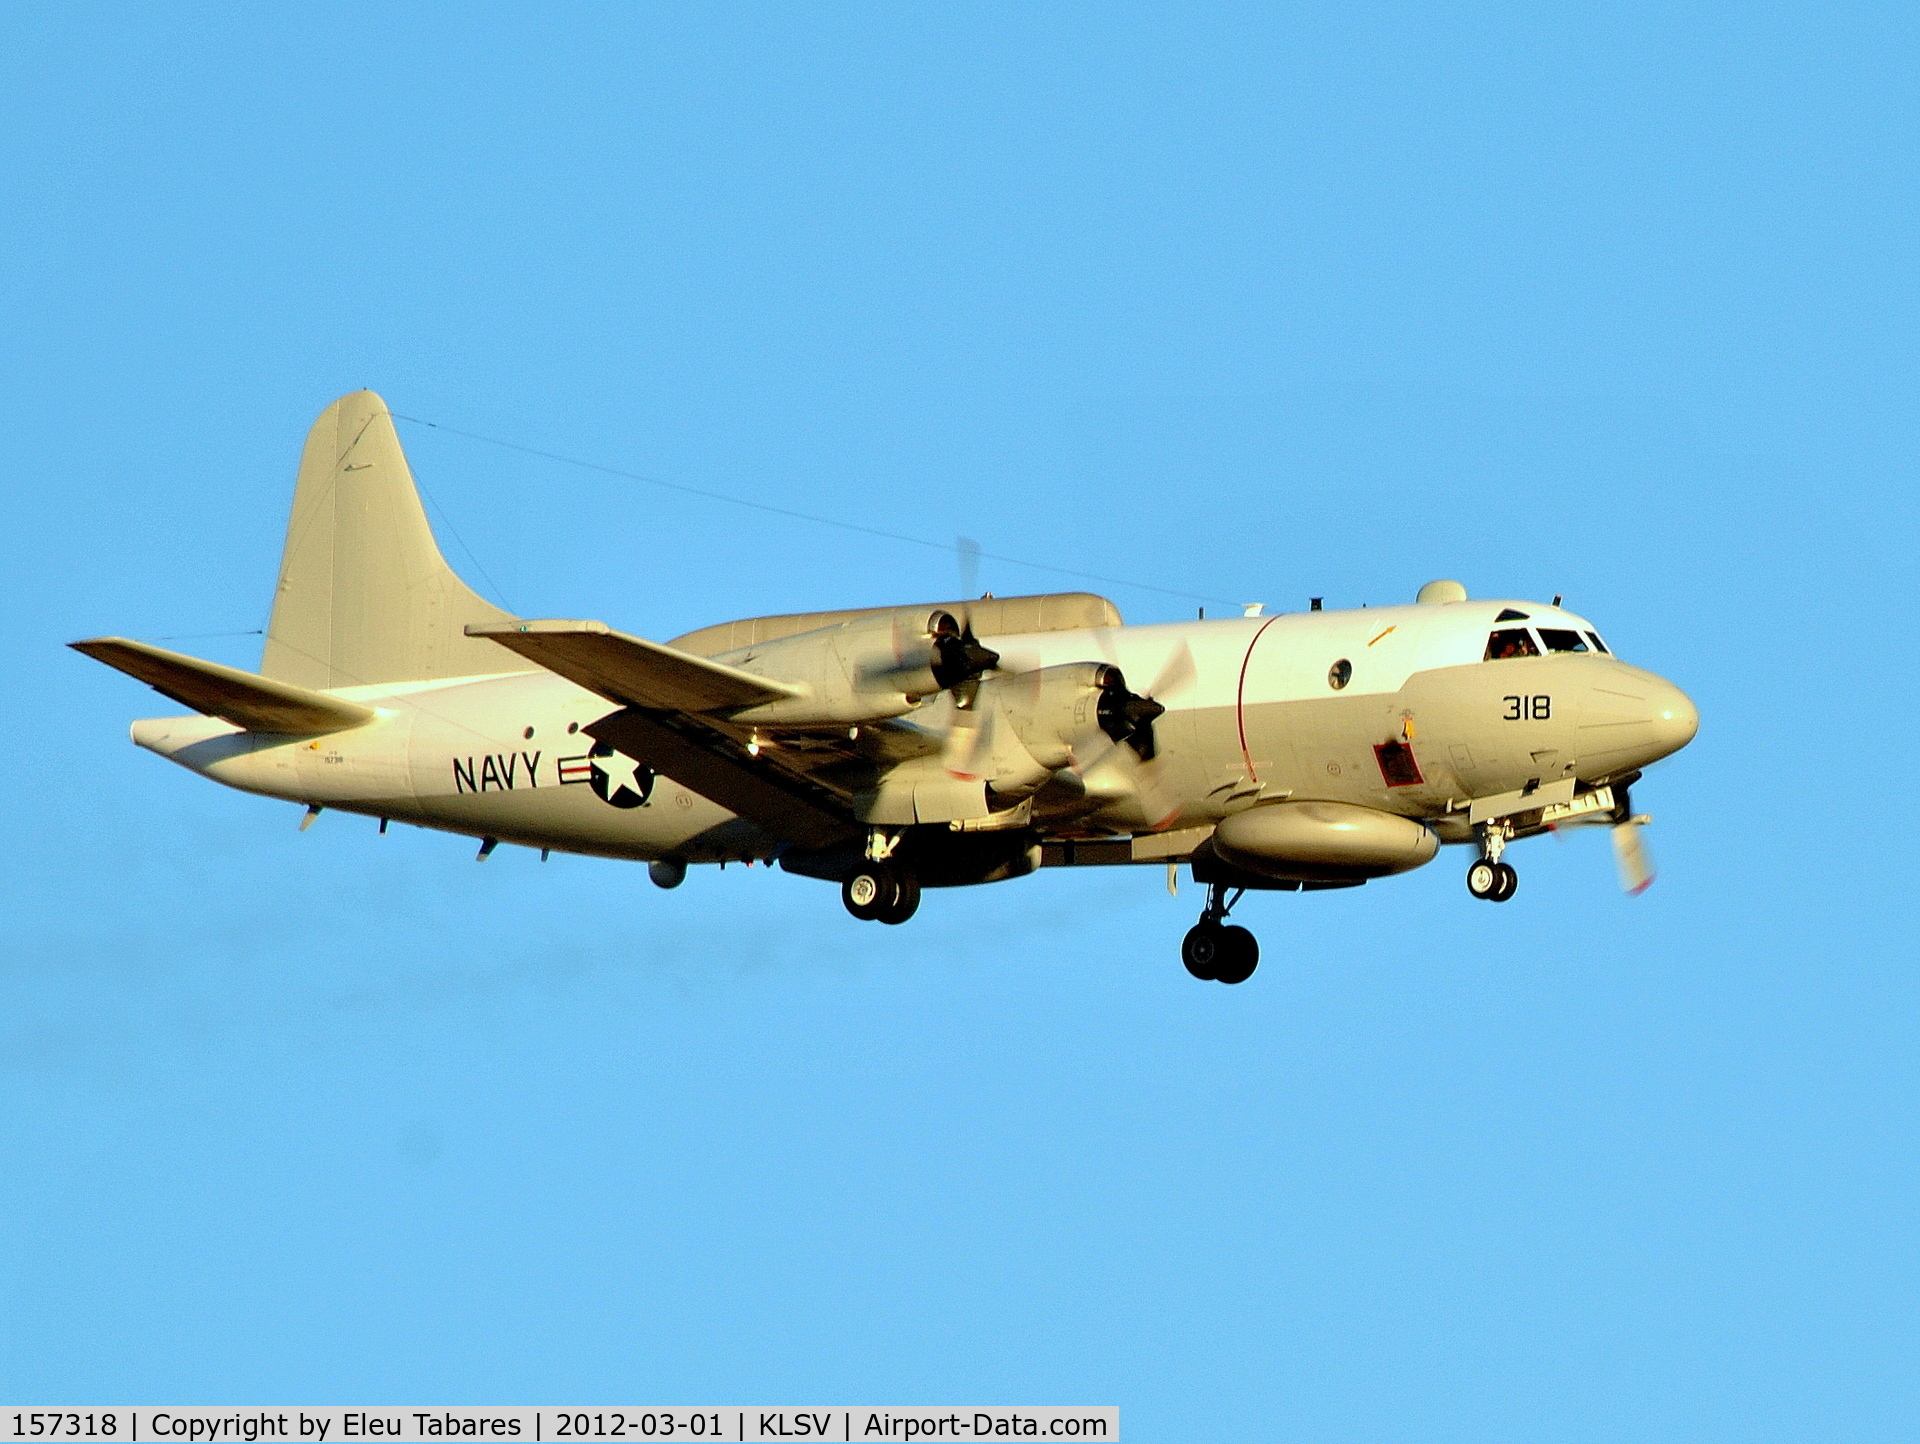 157318, Lockheed EP-3E Aries II C/N 285A-5533, Taken during Red Flag Exercise at Nellis Air Force Base, Nevada.